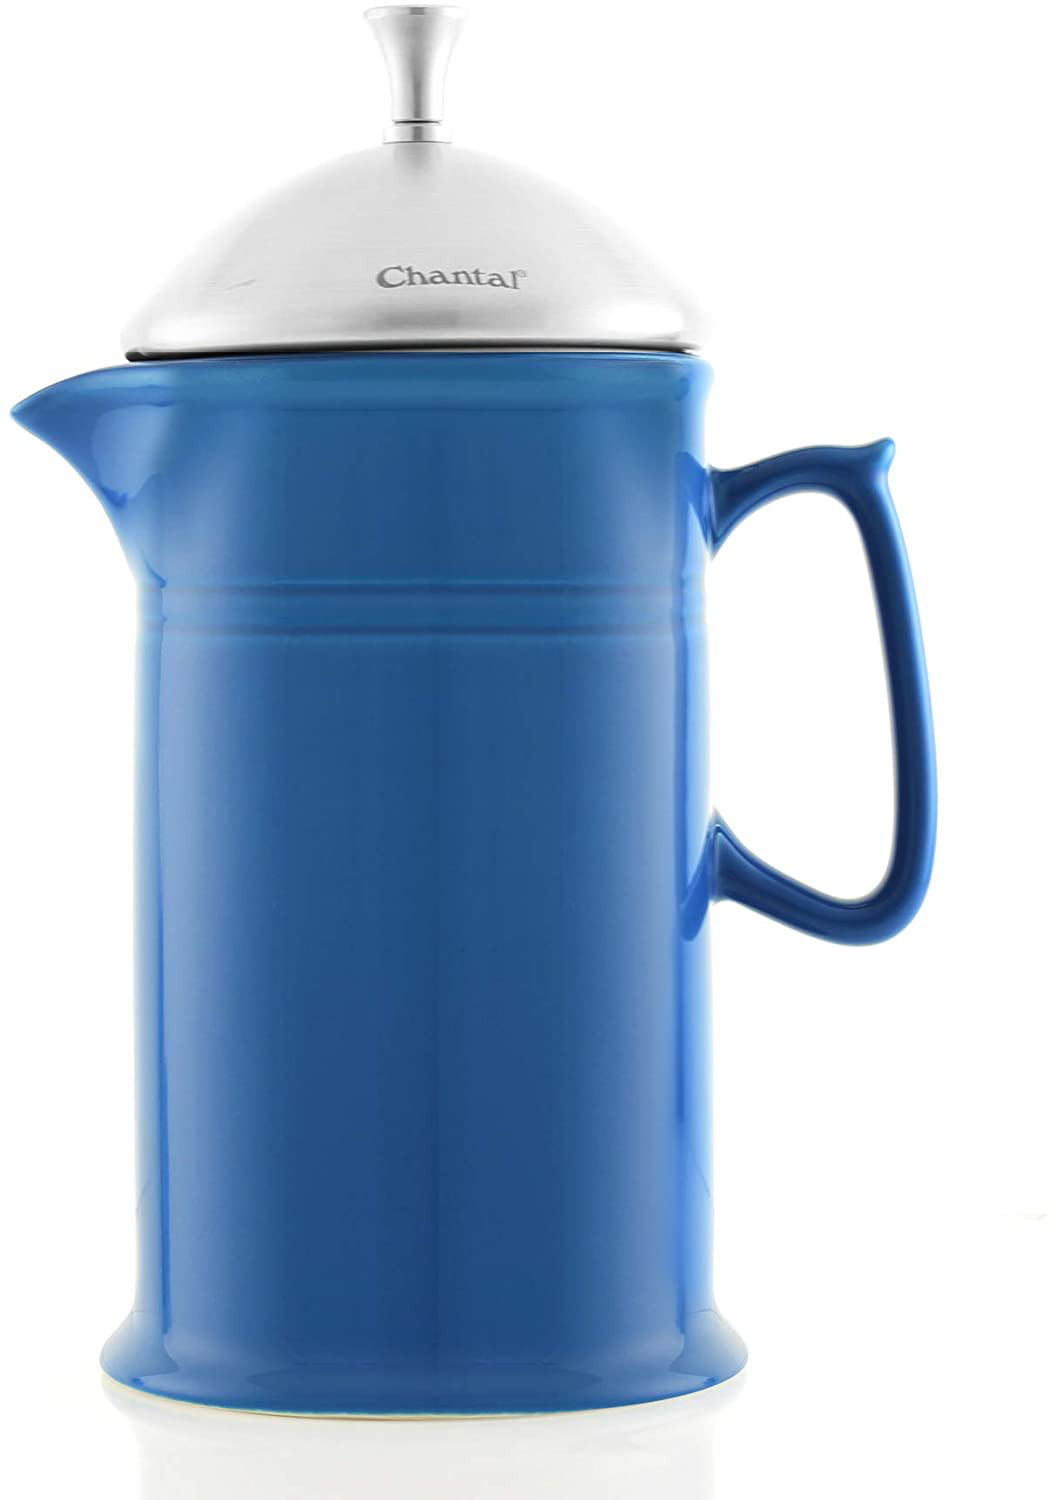 Chantal Blue Cove Ceramic French Press With Stainless Steel Plunger And Lid